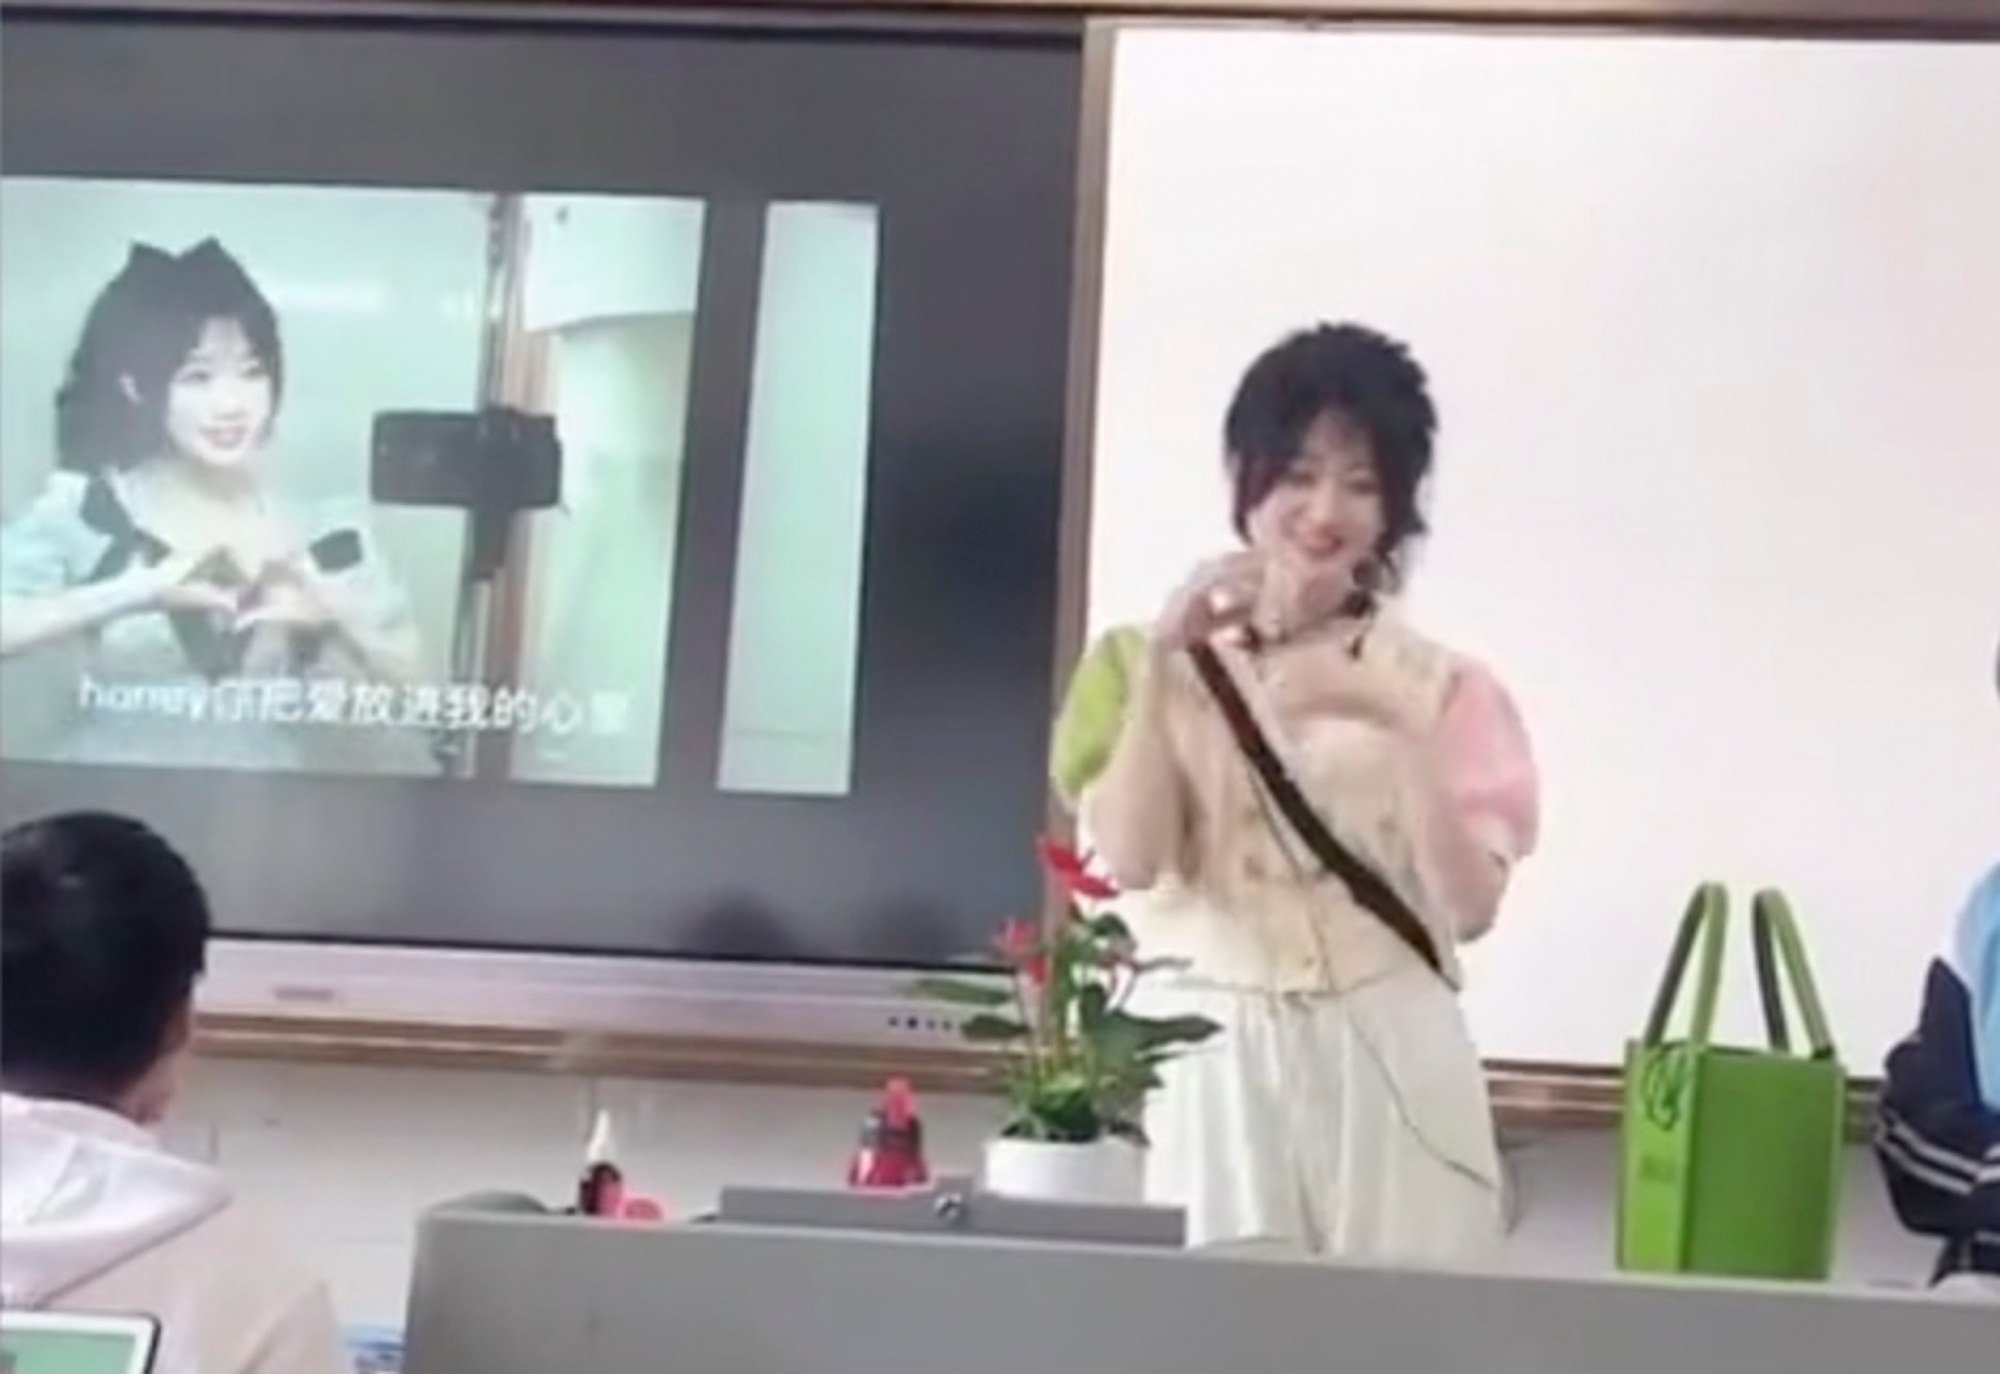 At the last national Teacher’s Day the Sailor Moon lookalike educator made a film by herself to show her class a more relaxed atmosphere on the day. Photo: Baidu